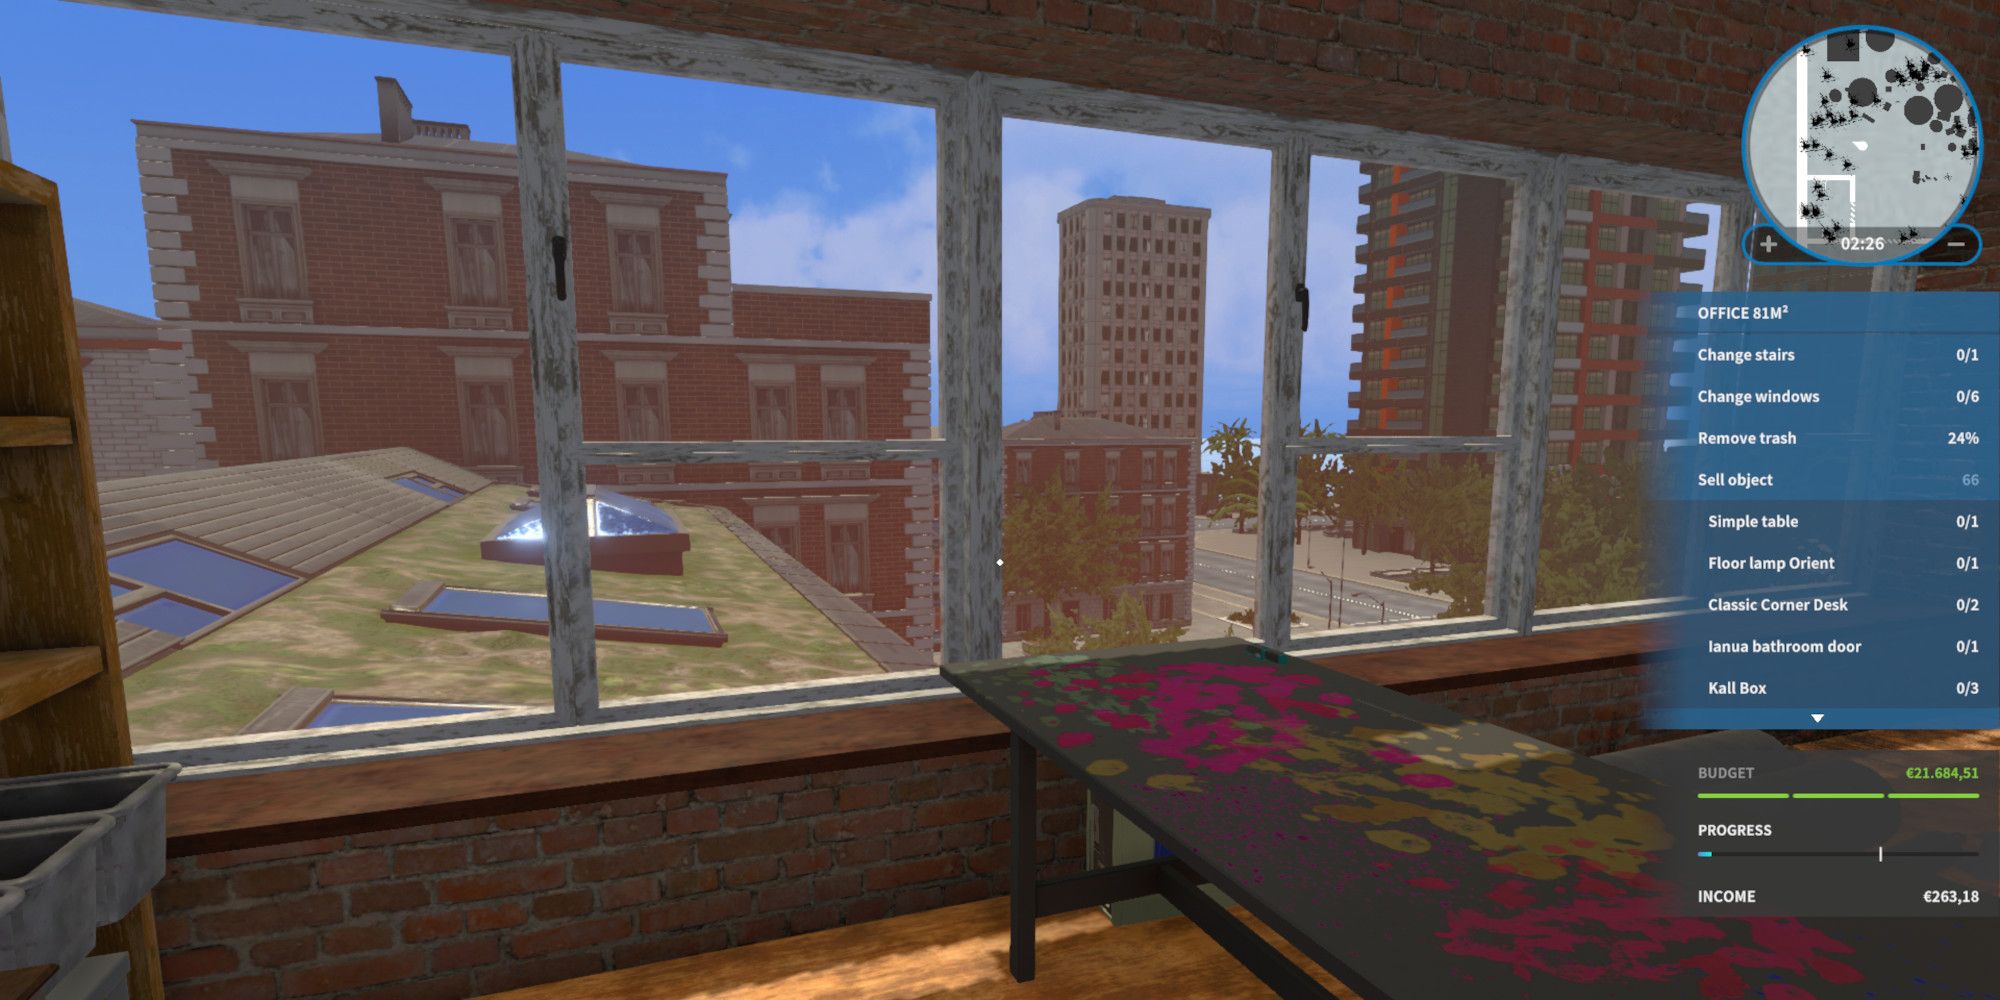 A loft apartment from the House Flipper Luxury DLC